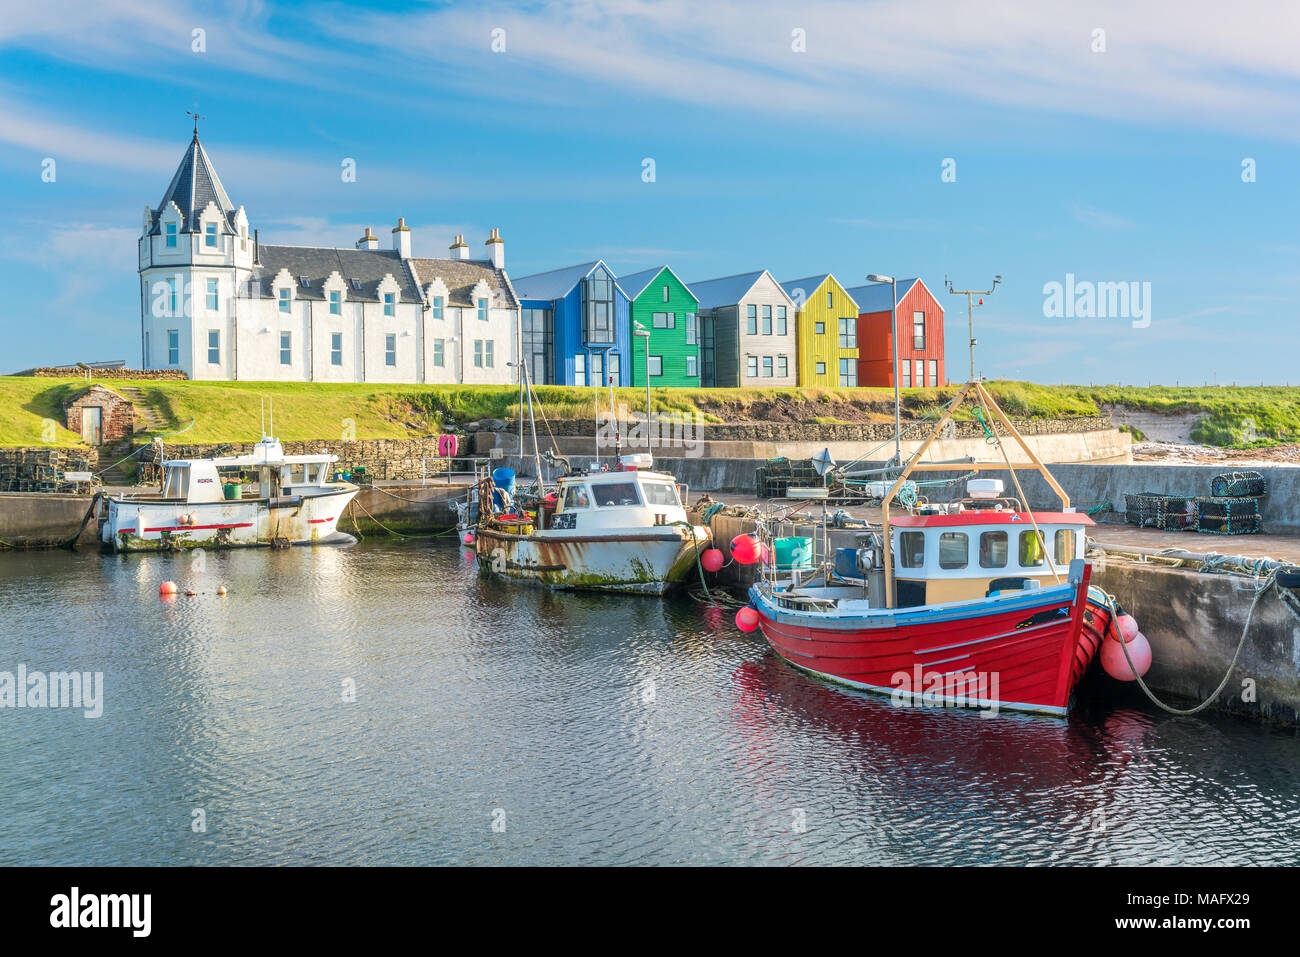 The colorful buildings of John O'Groats in a sunny afternoon, Caithness county, Scotland. Stock Photo